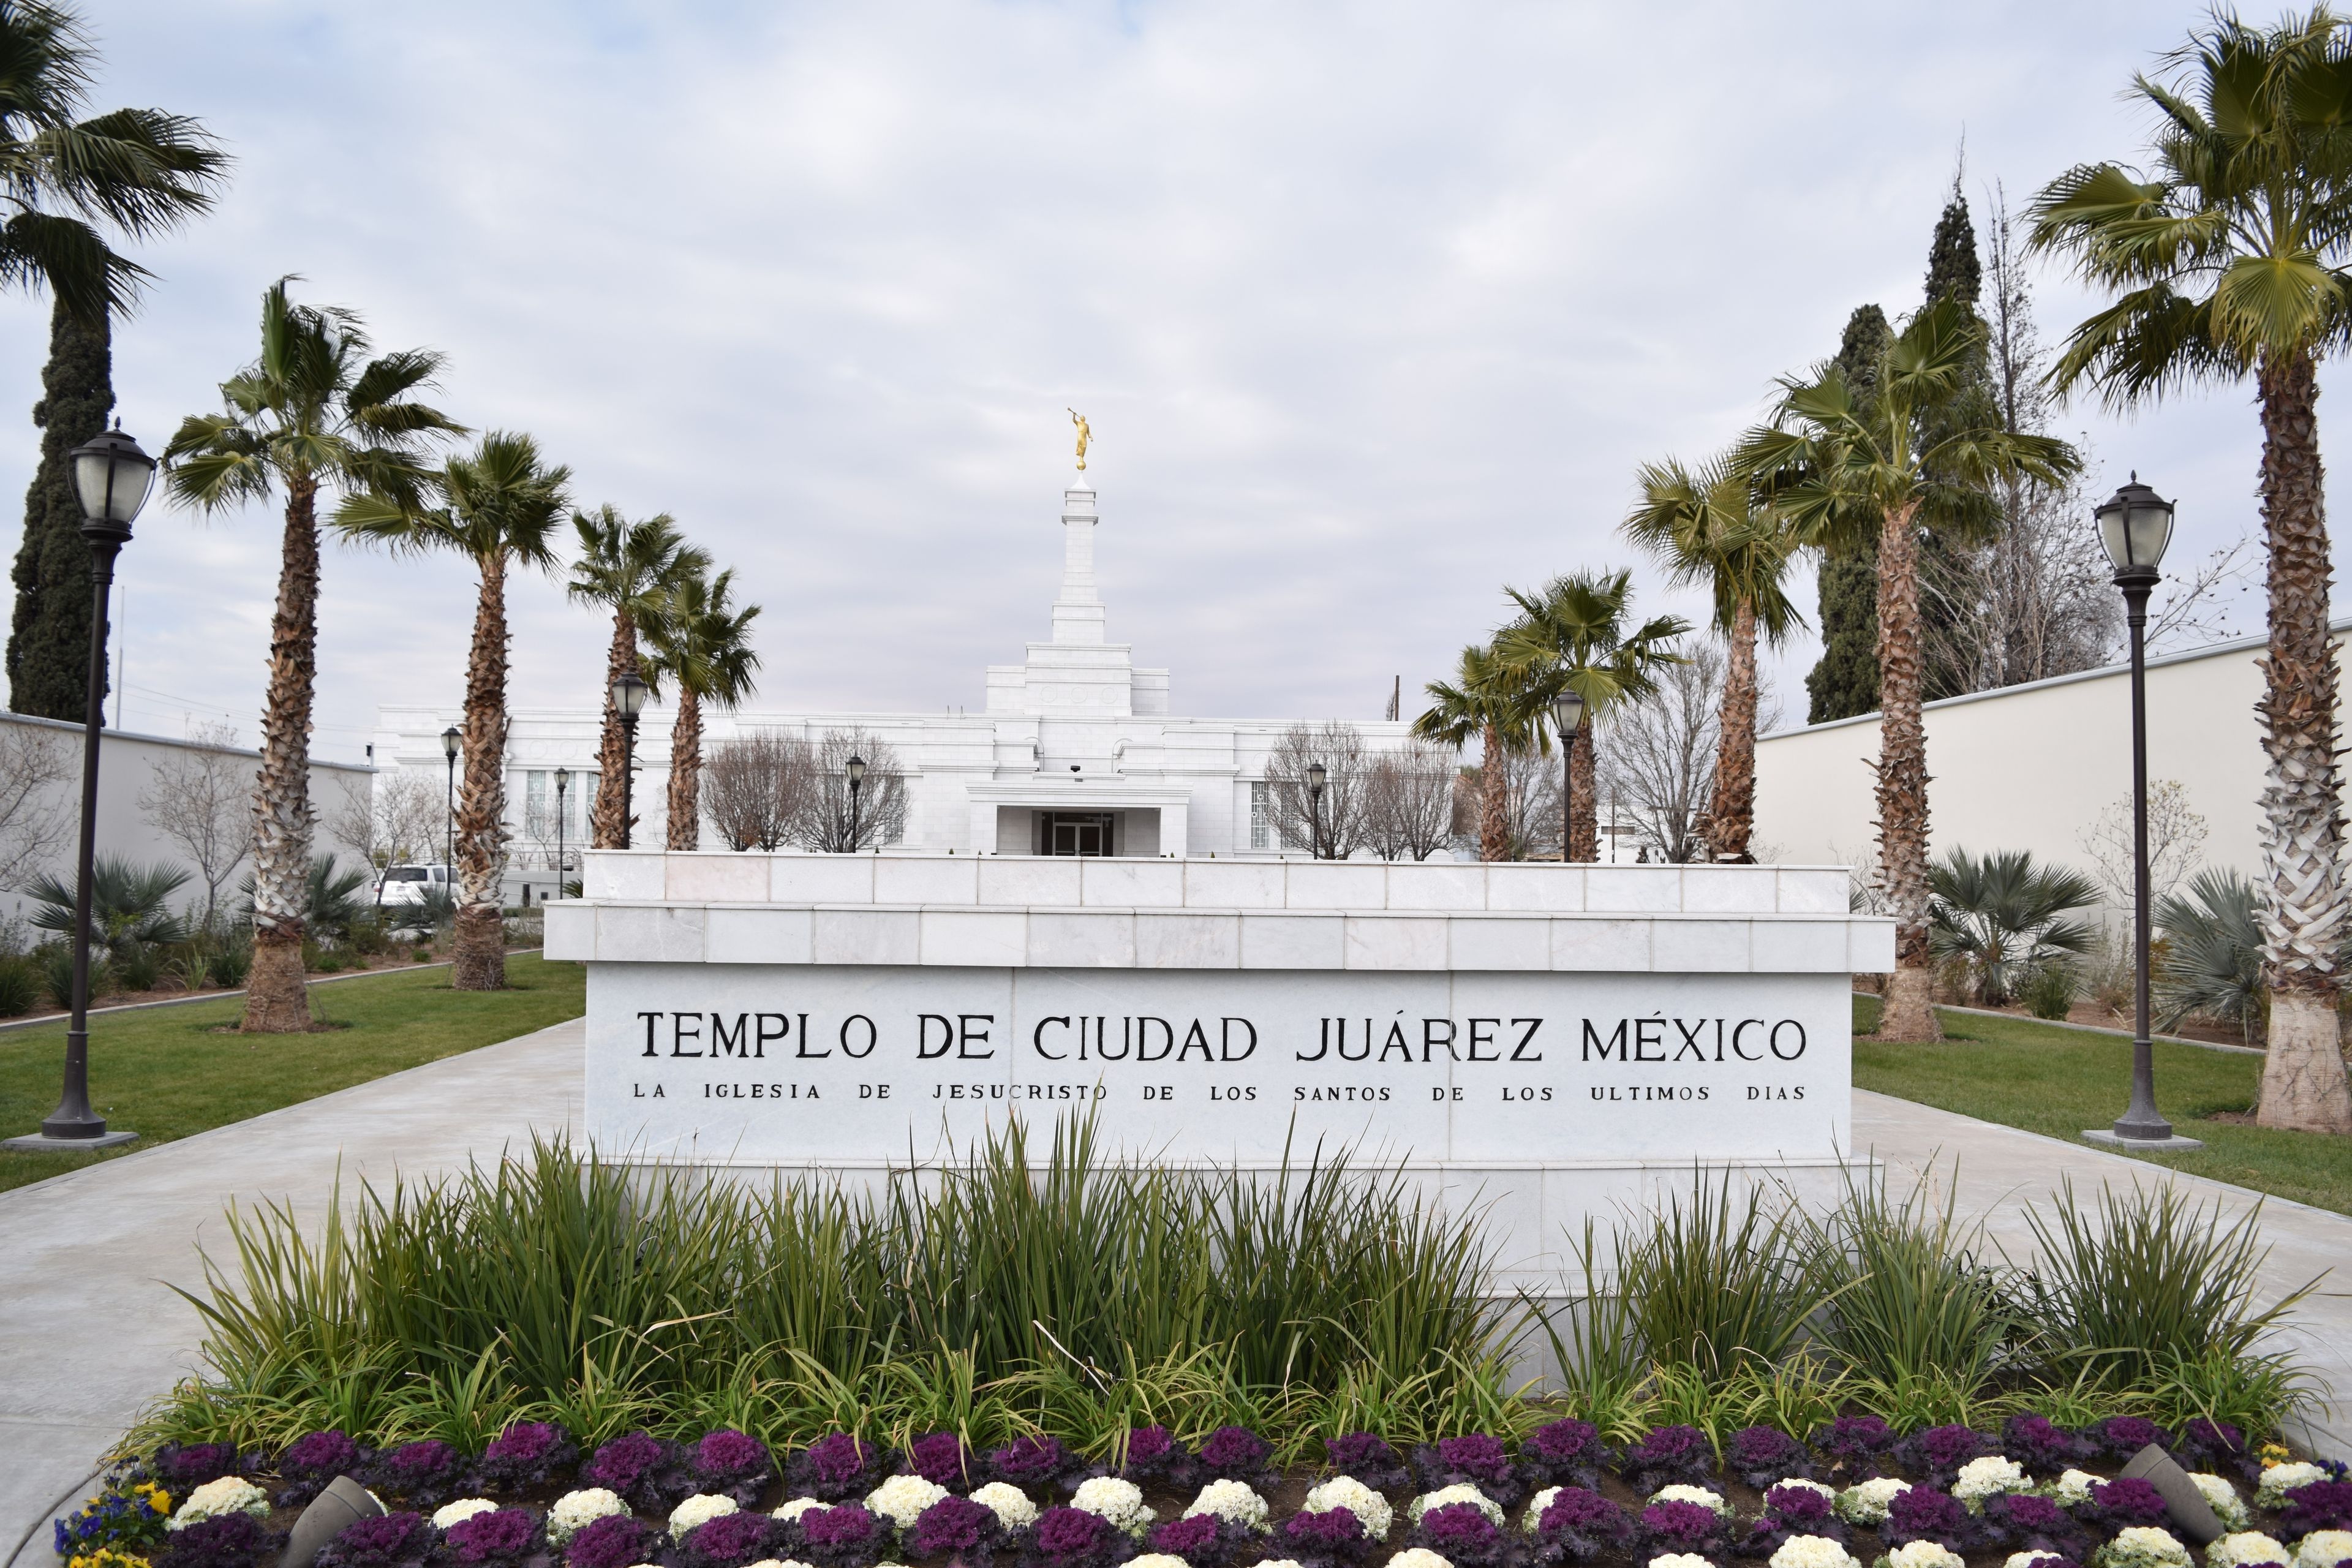 The temple name sign of the Ciudad Juárez Mexico Temple.